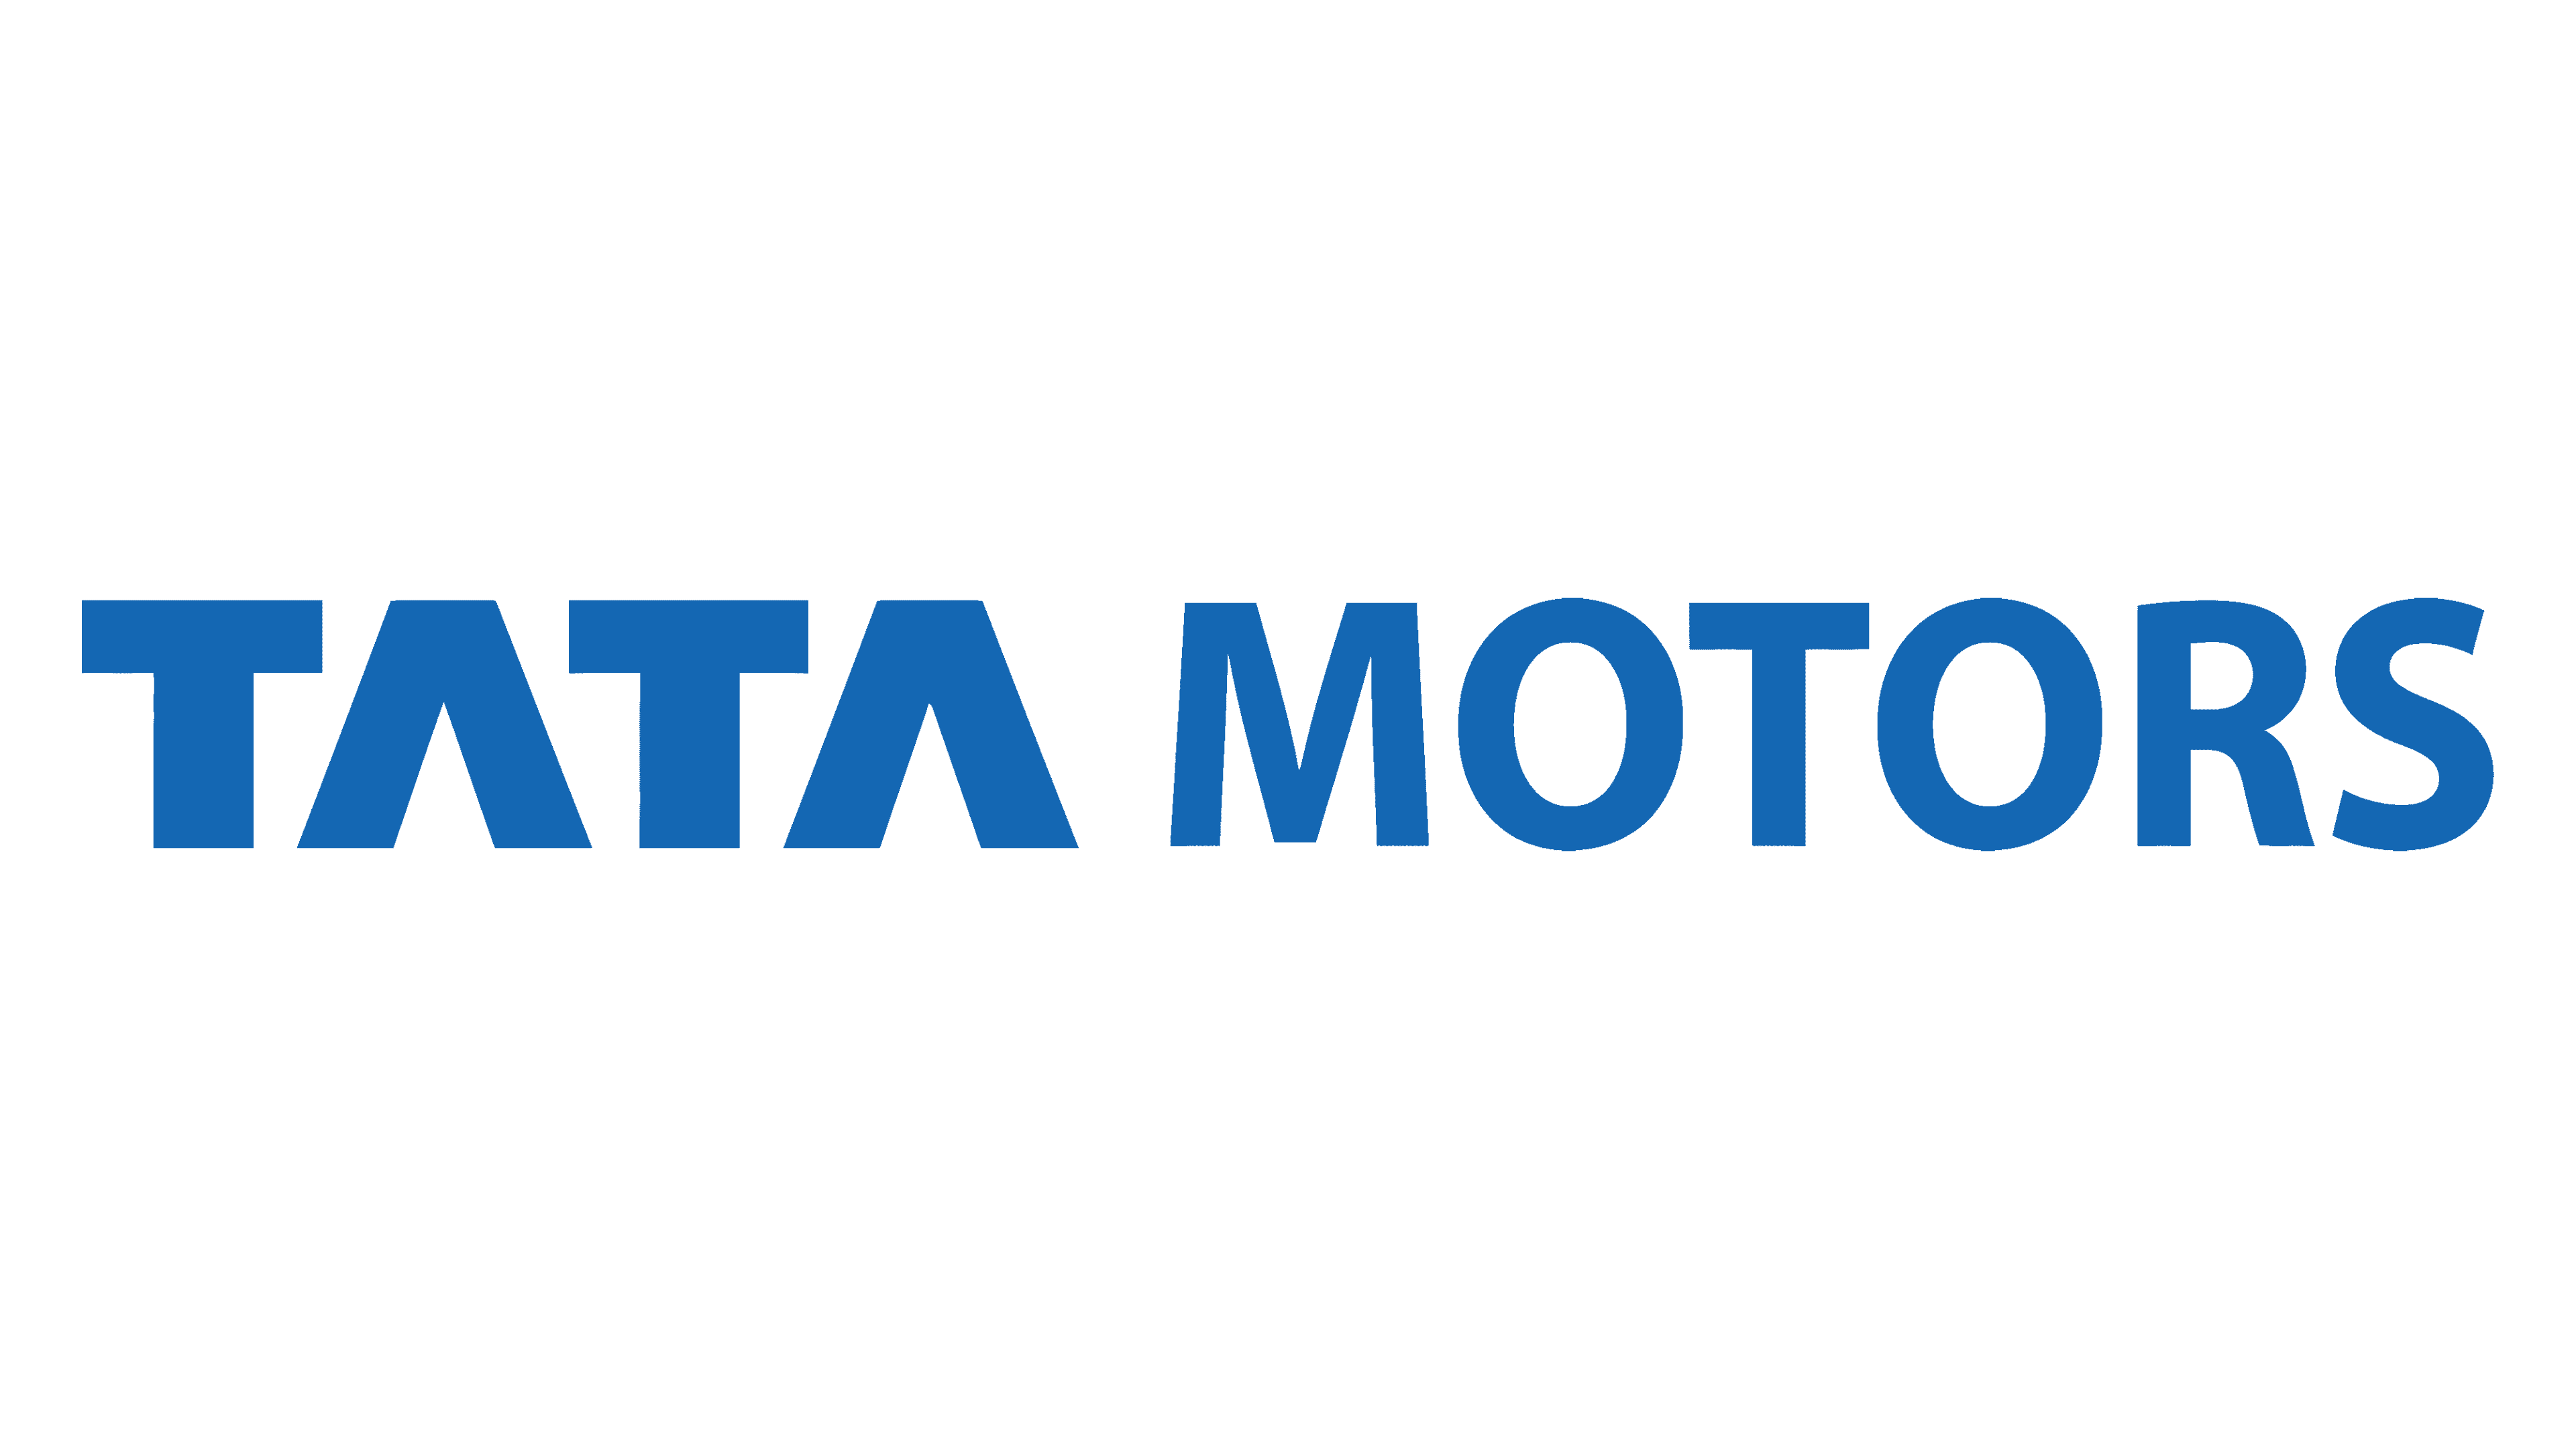 Tata Motors Introduces New Brand Identity For Electric Vehicles